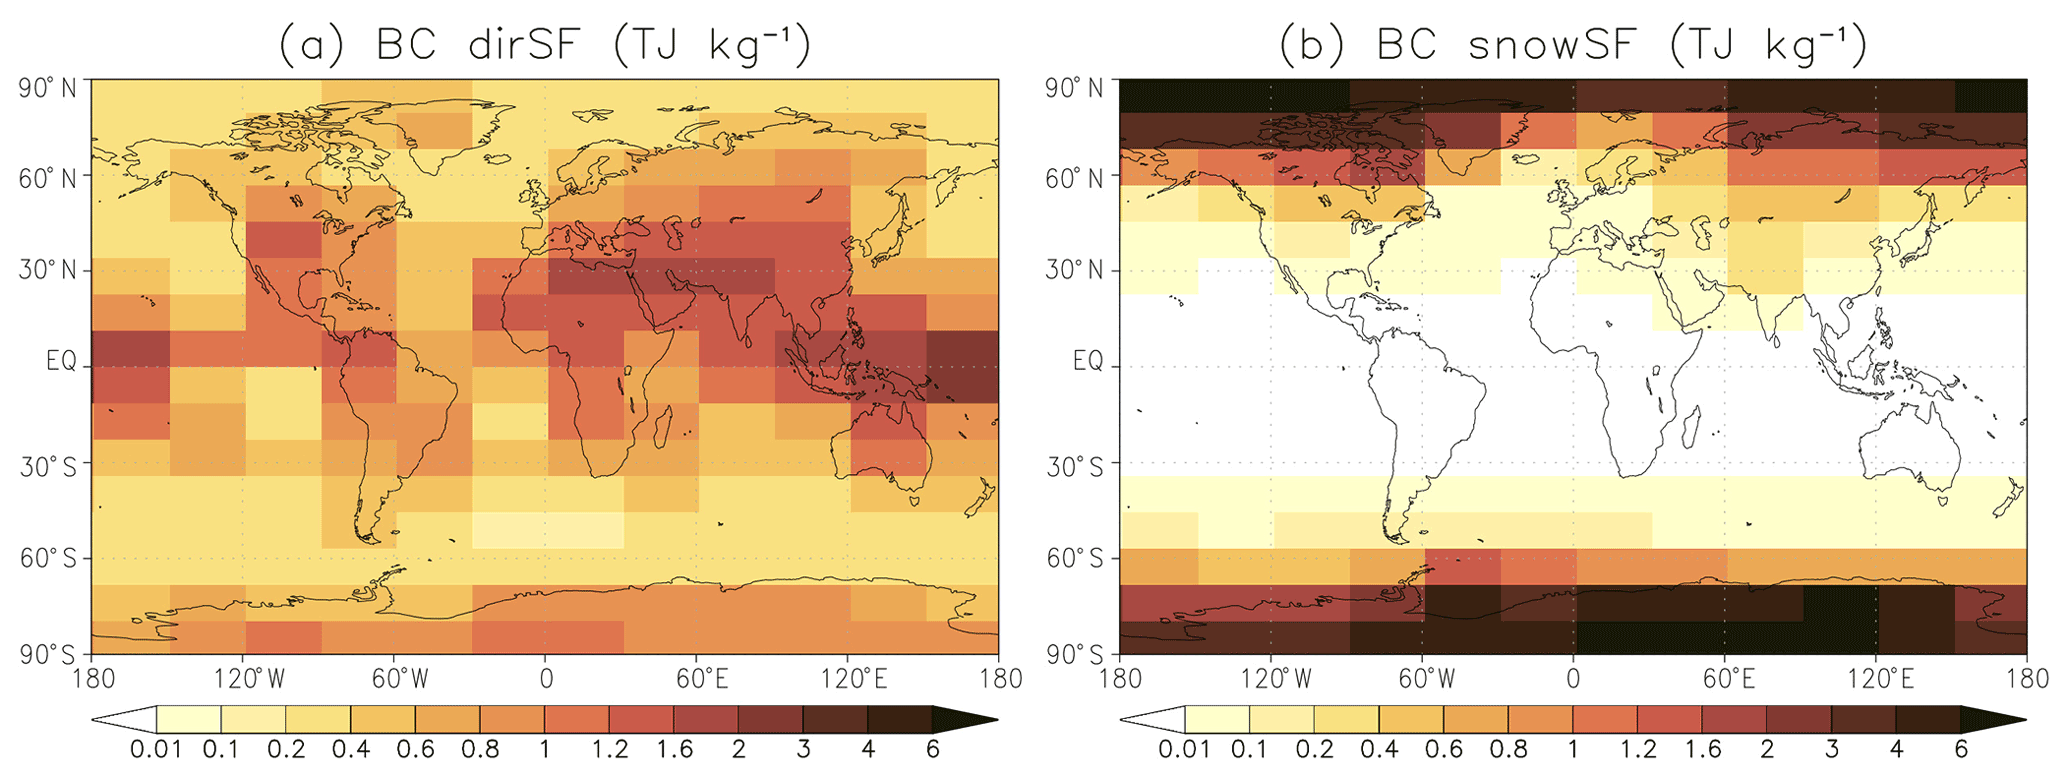 ACP - Mapping the dependence of black carbon radiative forcing on